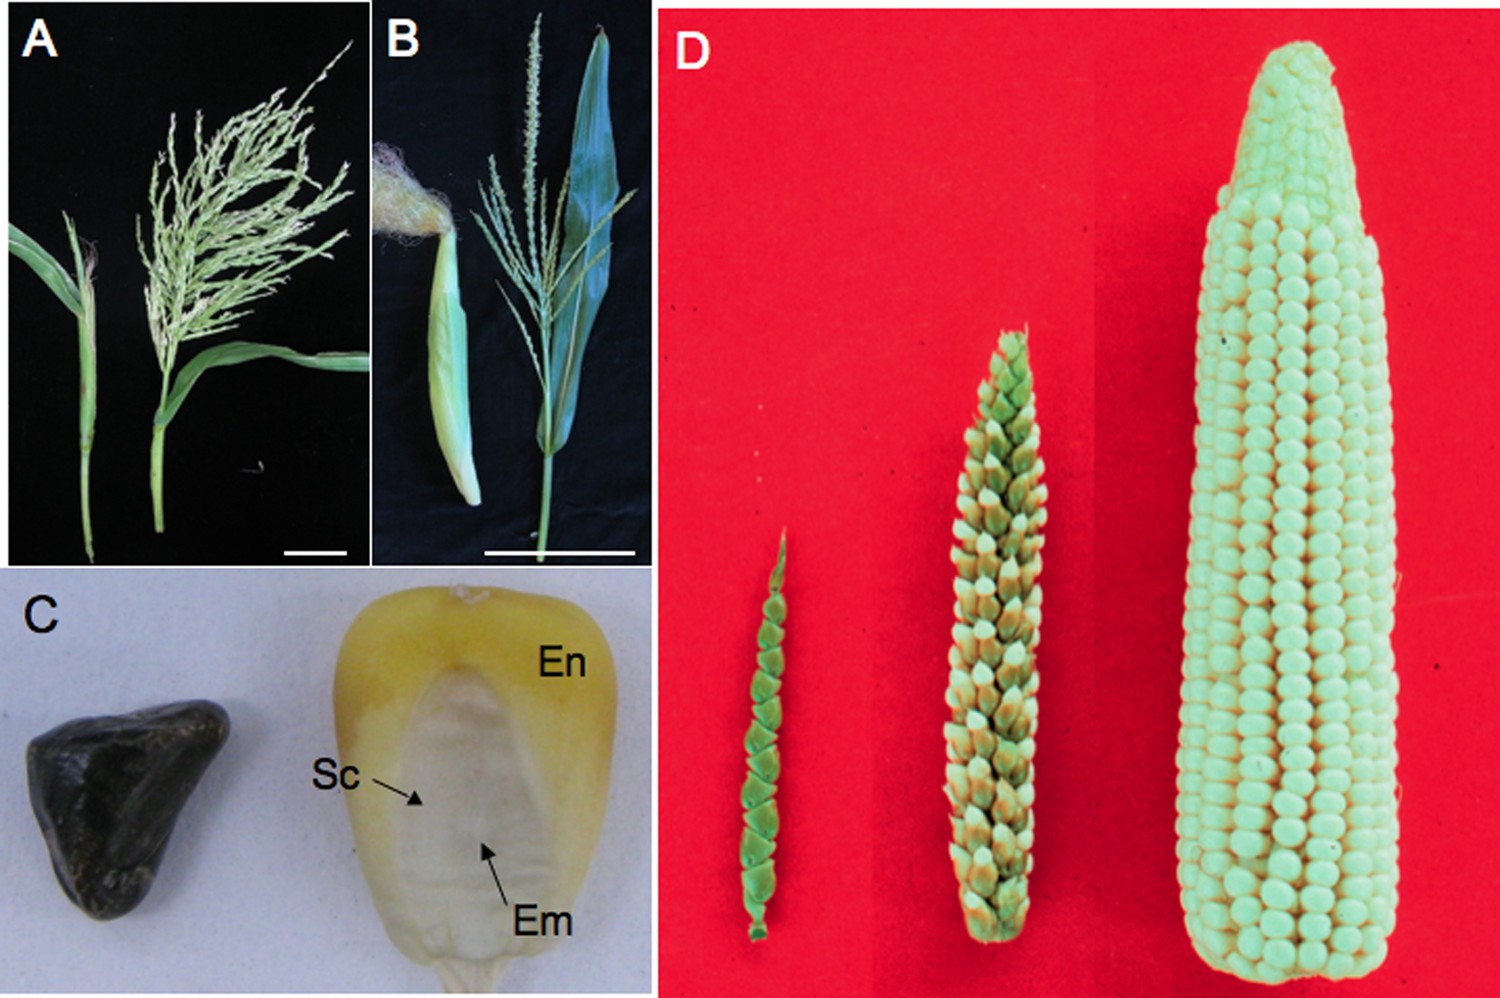 The Natural History of Model Organisms: Genetic, evolutionary and plant breeding insights from the domestication of maize | eLife